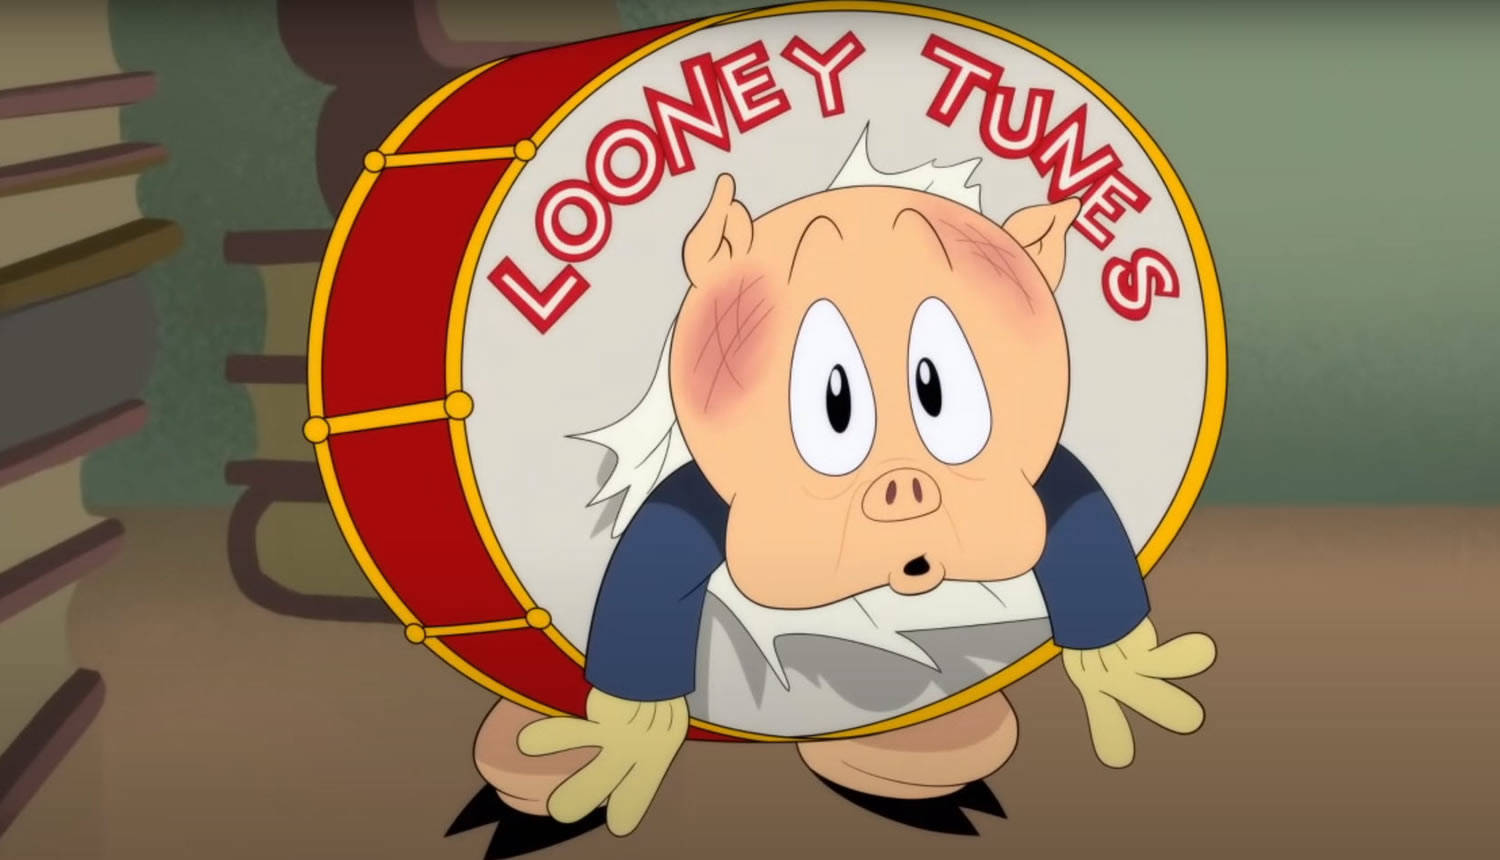 Porky Pig Looney Tunes Cartoon Show Series Picture